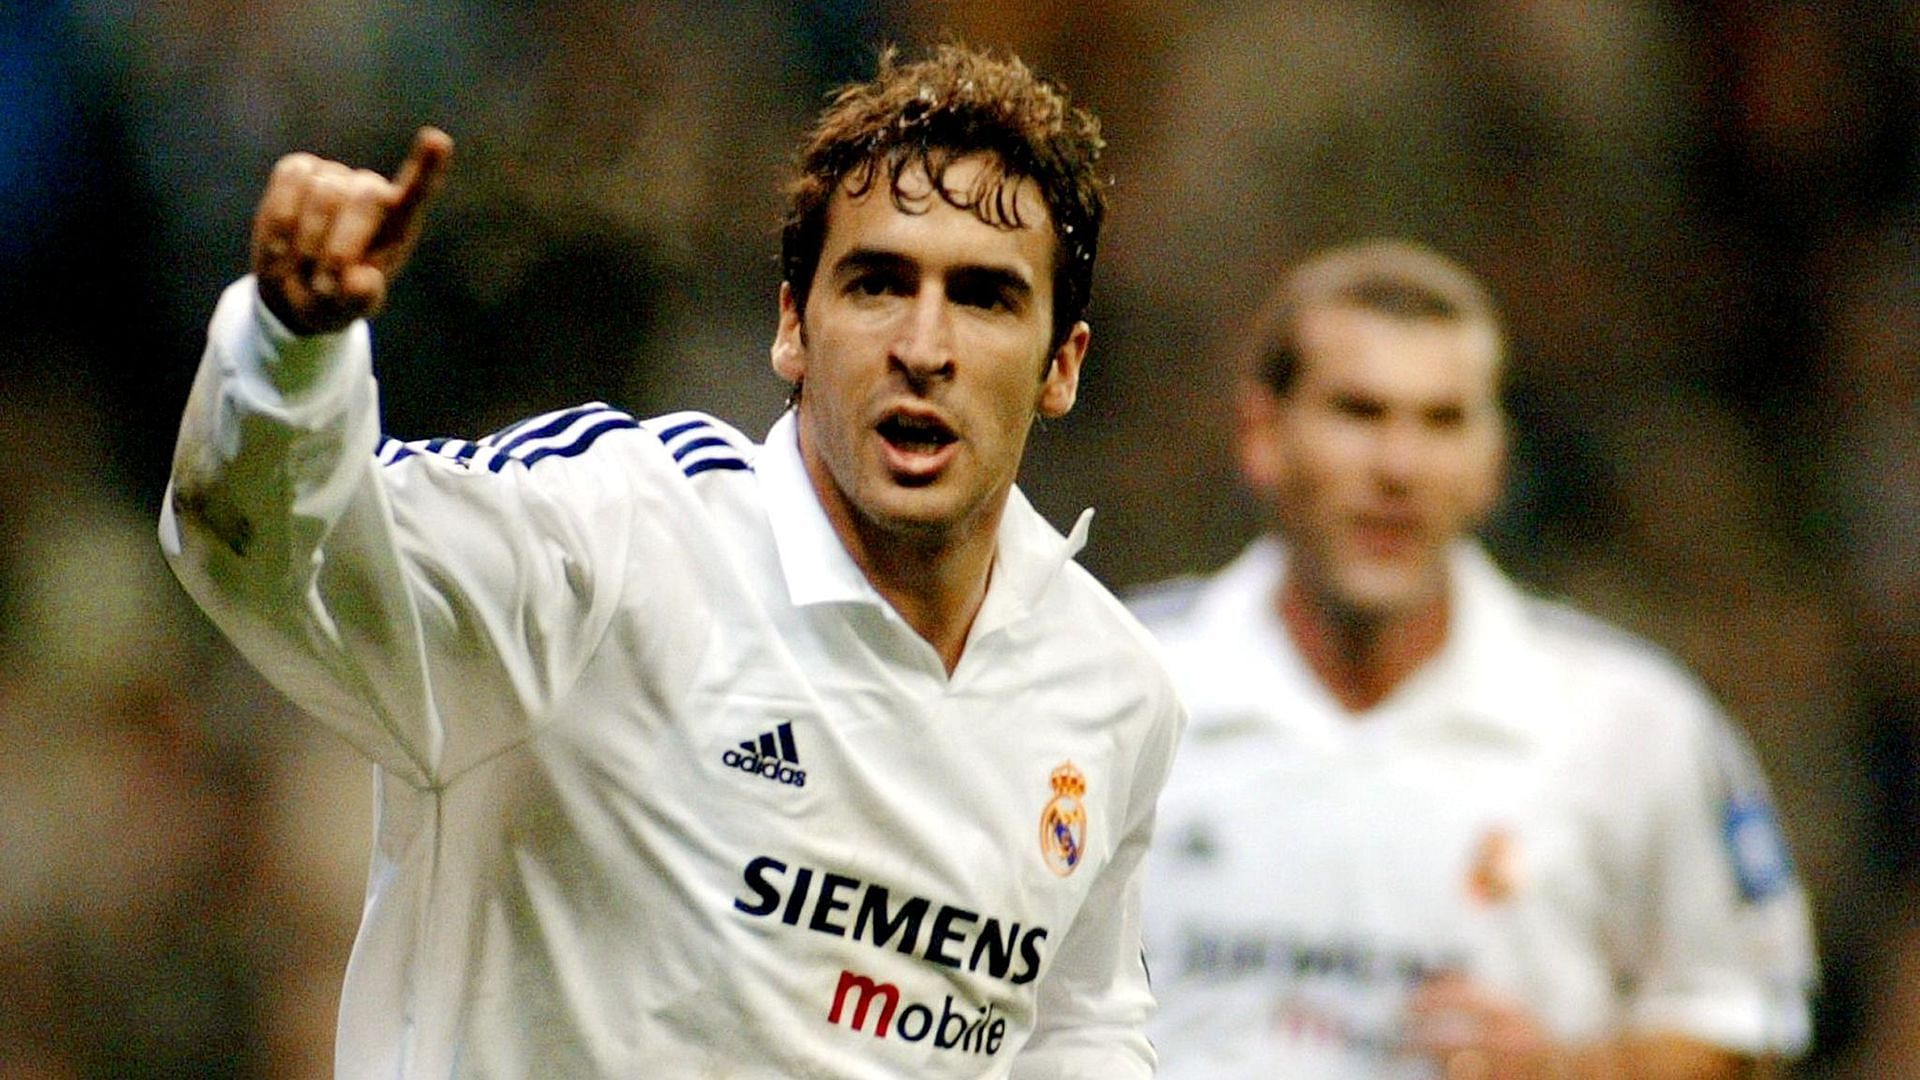 Raul is one of the youngest goal scorers in Real Madrid history